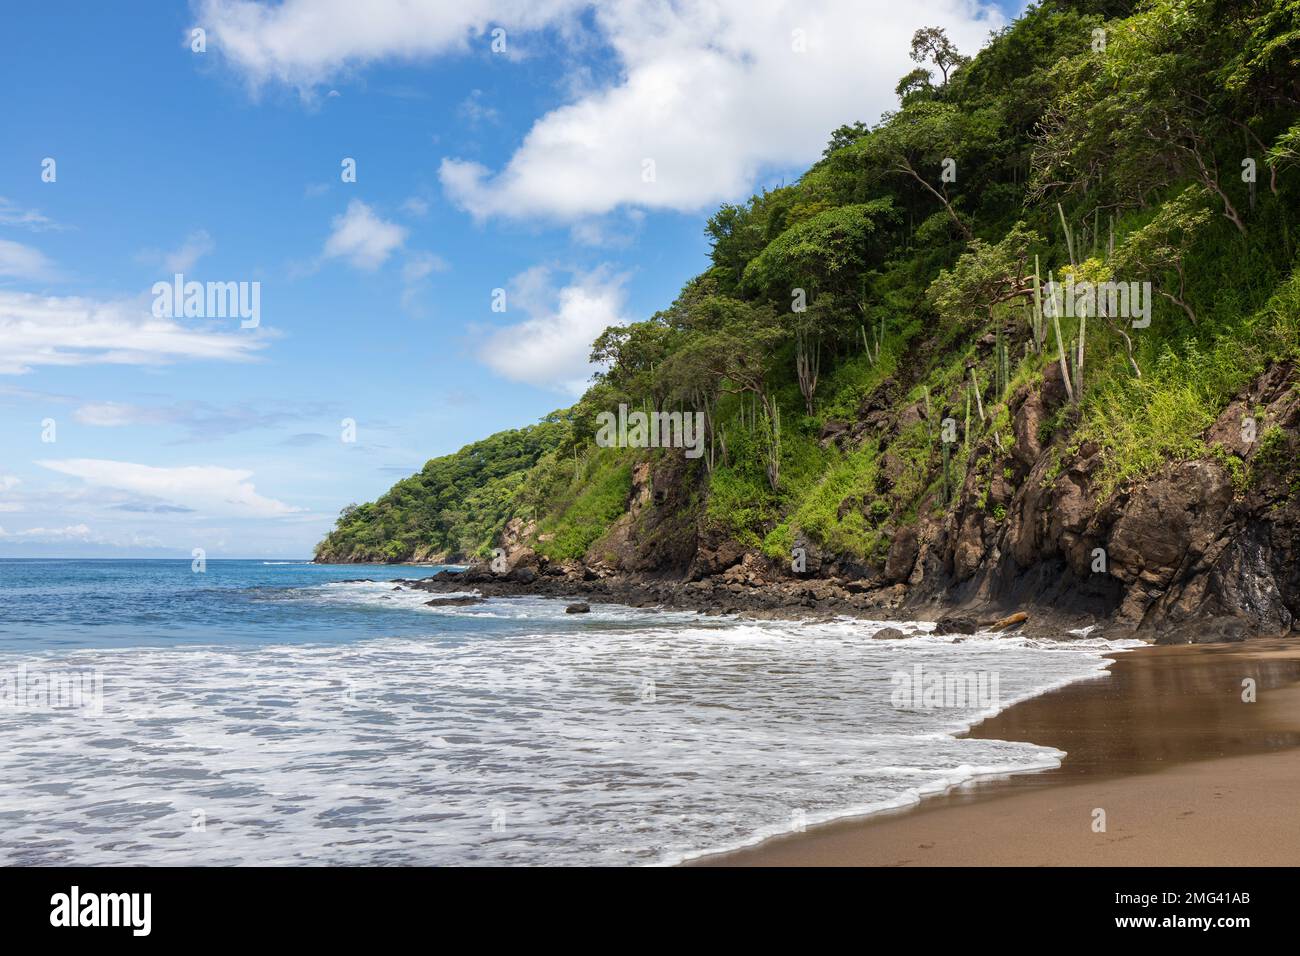 Waves wash on the shore of the vibrant green coast along the Gulf of Papagayo, Playas del Coco, Guanacaste Province in northwestern Costa Rica. Stock Photo